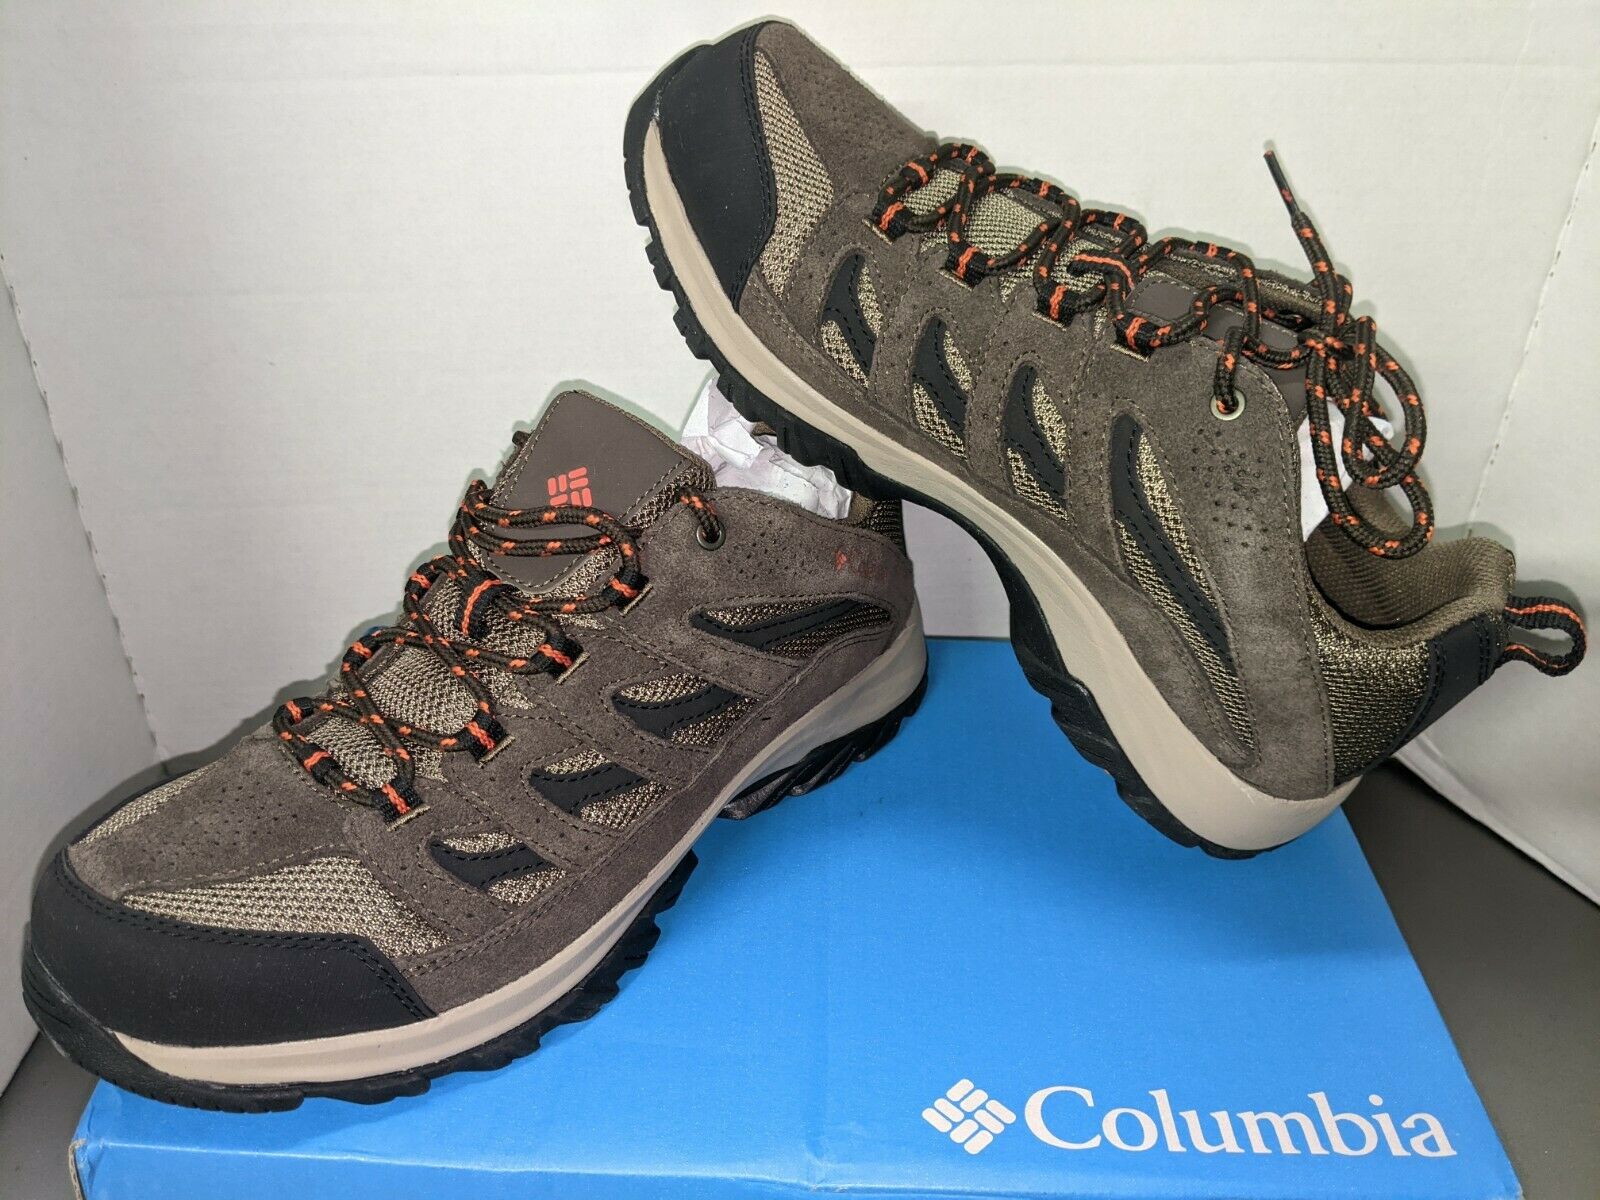 Columbia Men's Crestwood Hiking Shoe Brown lace up - 9.5 New in box